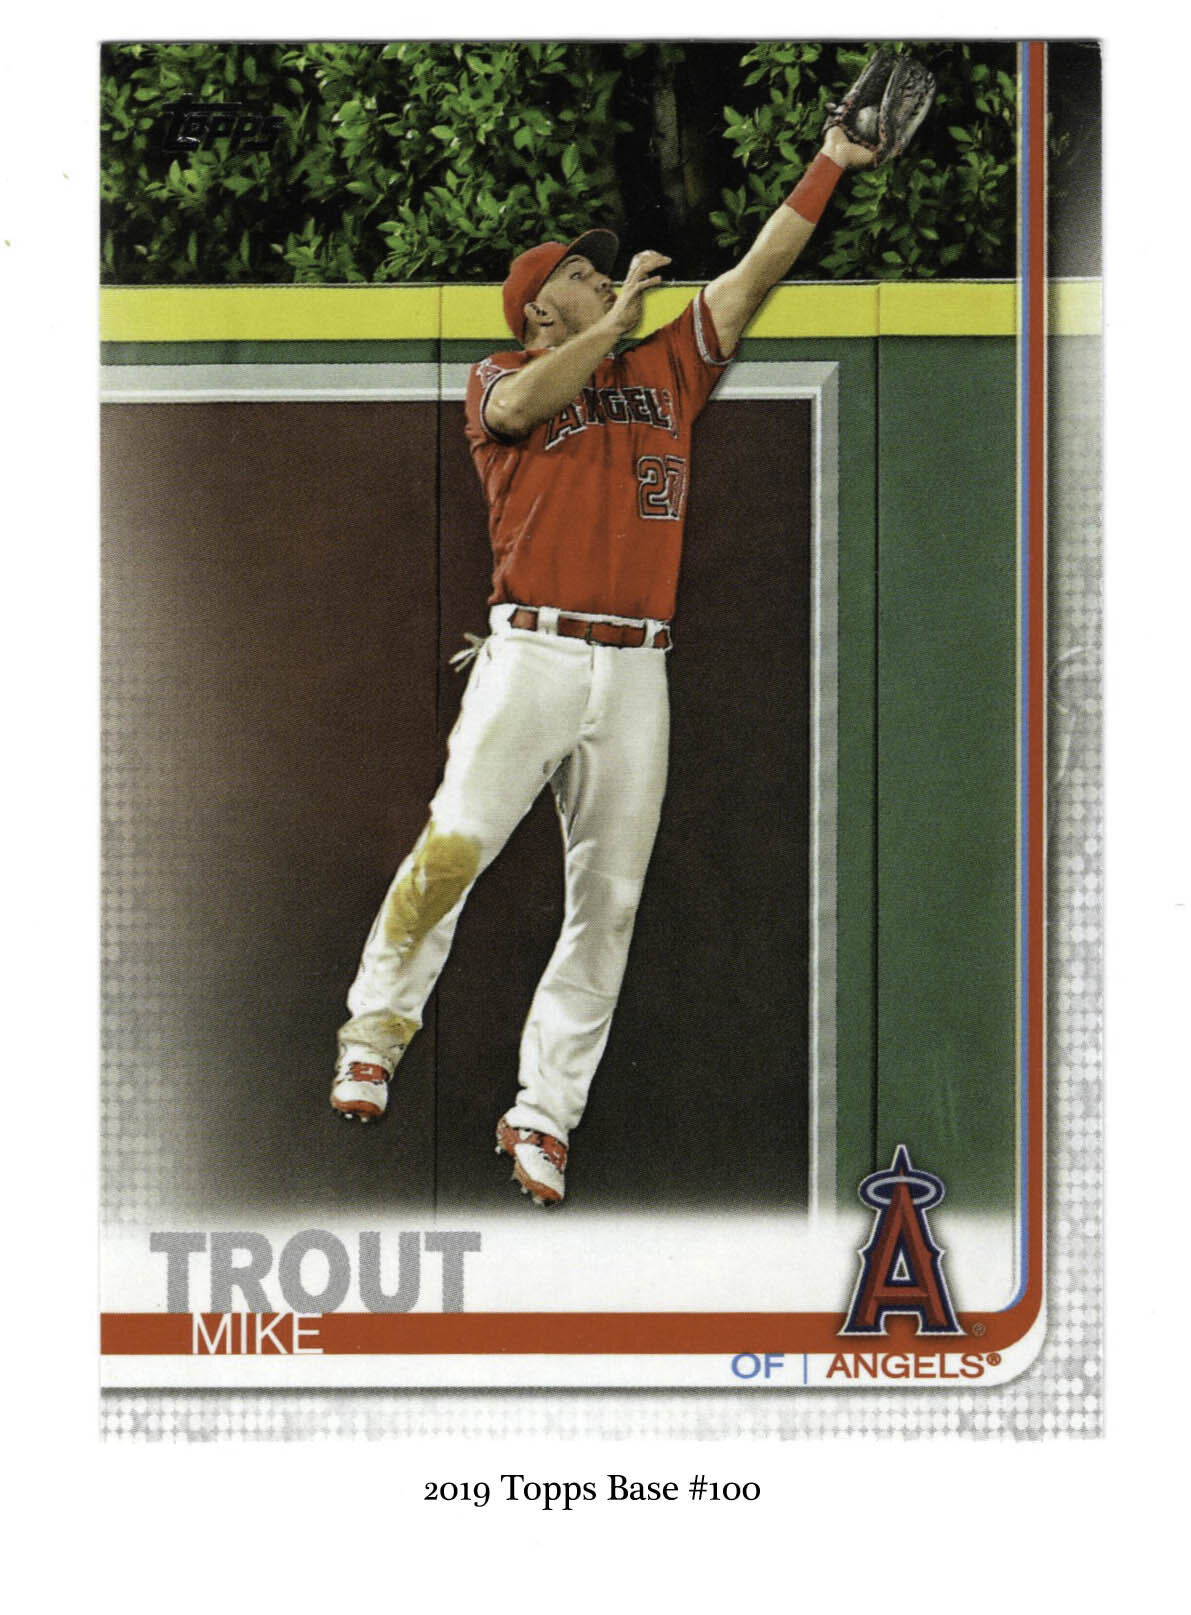 Mike Trout Topps Base.jpg